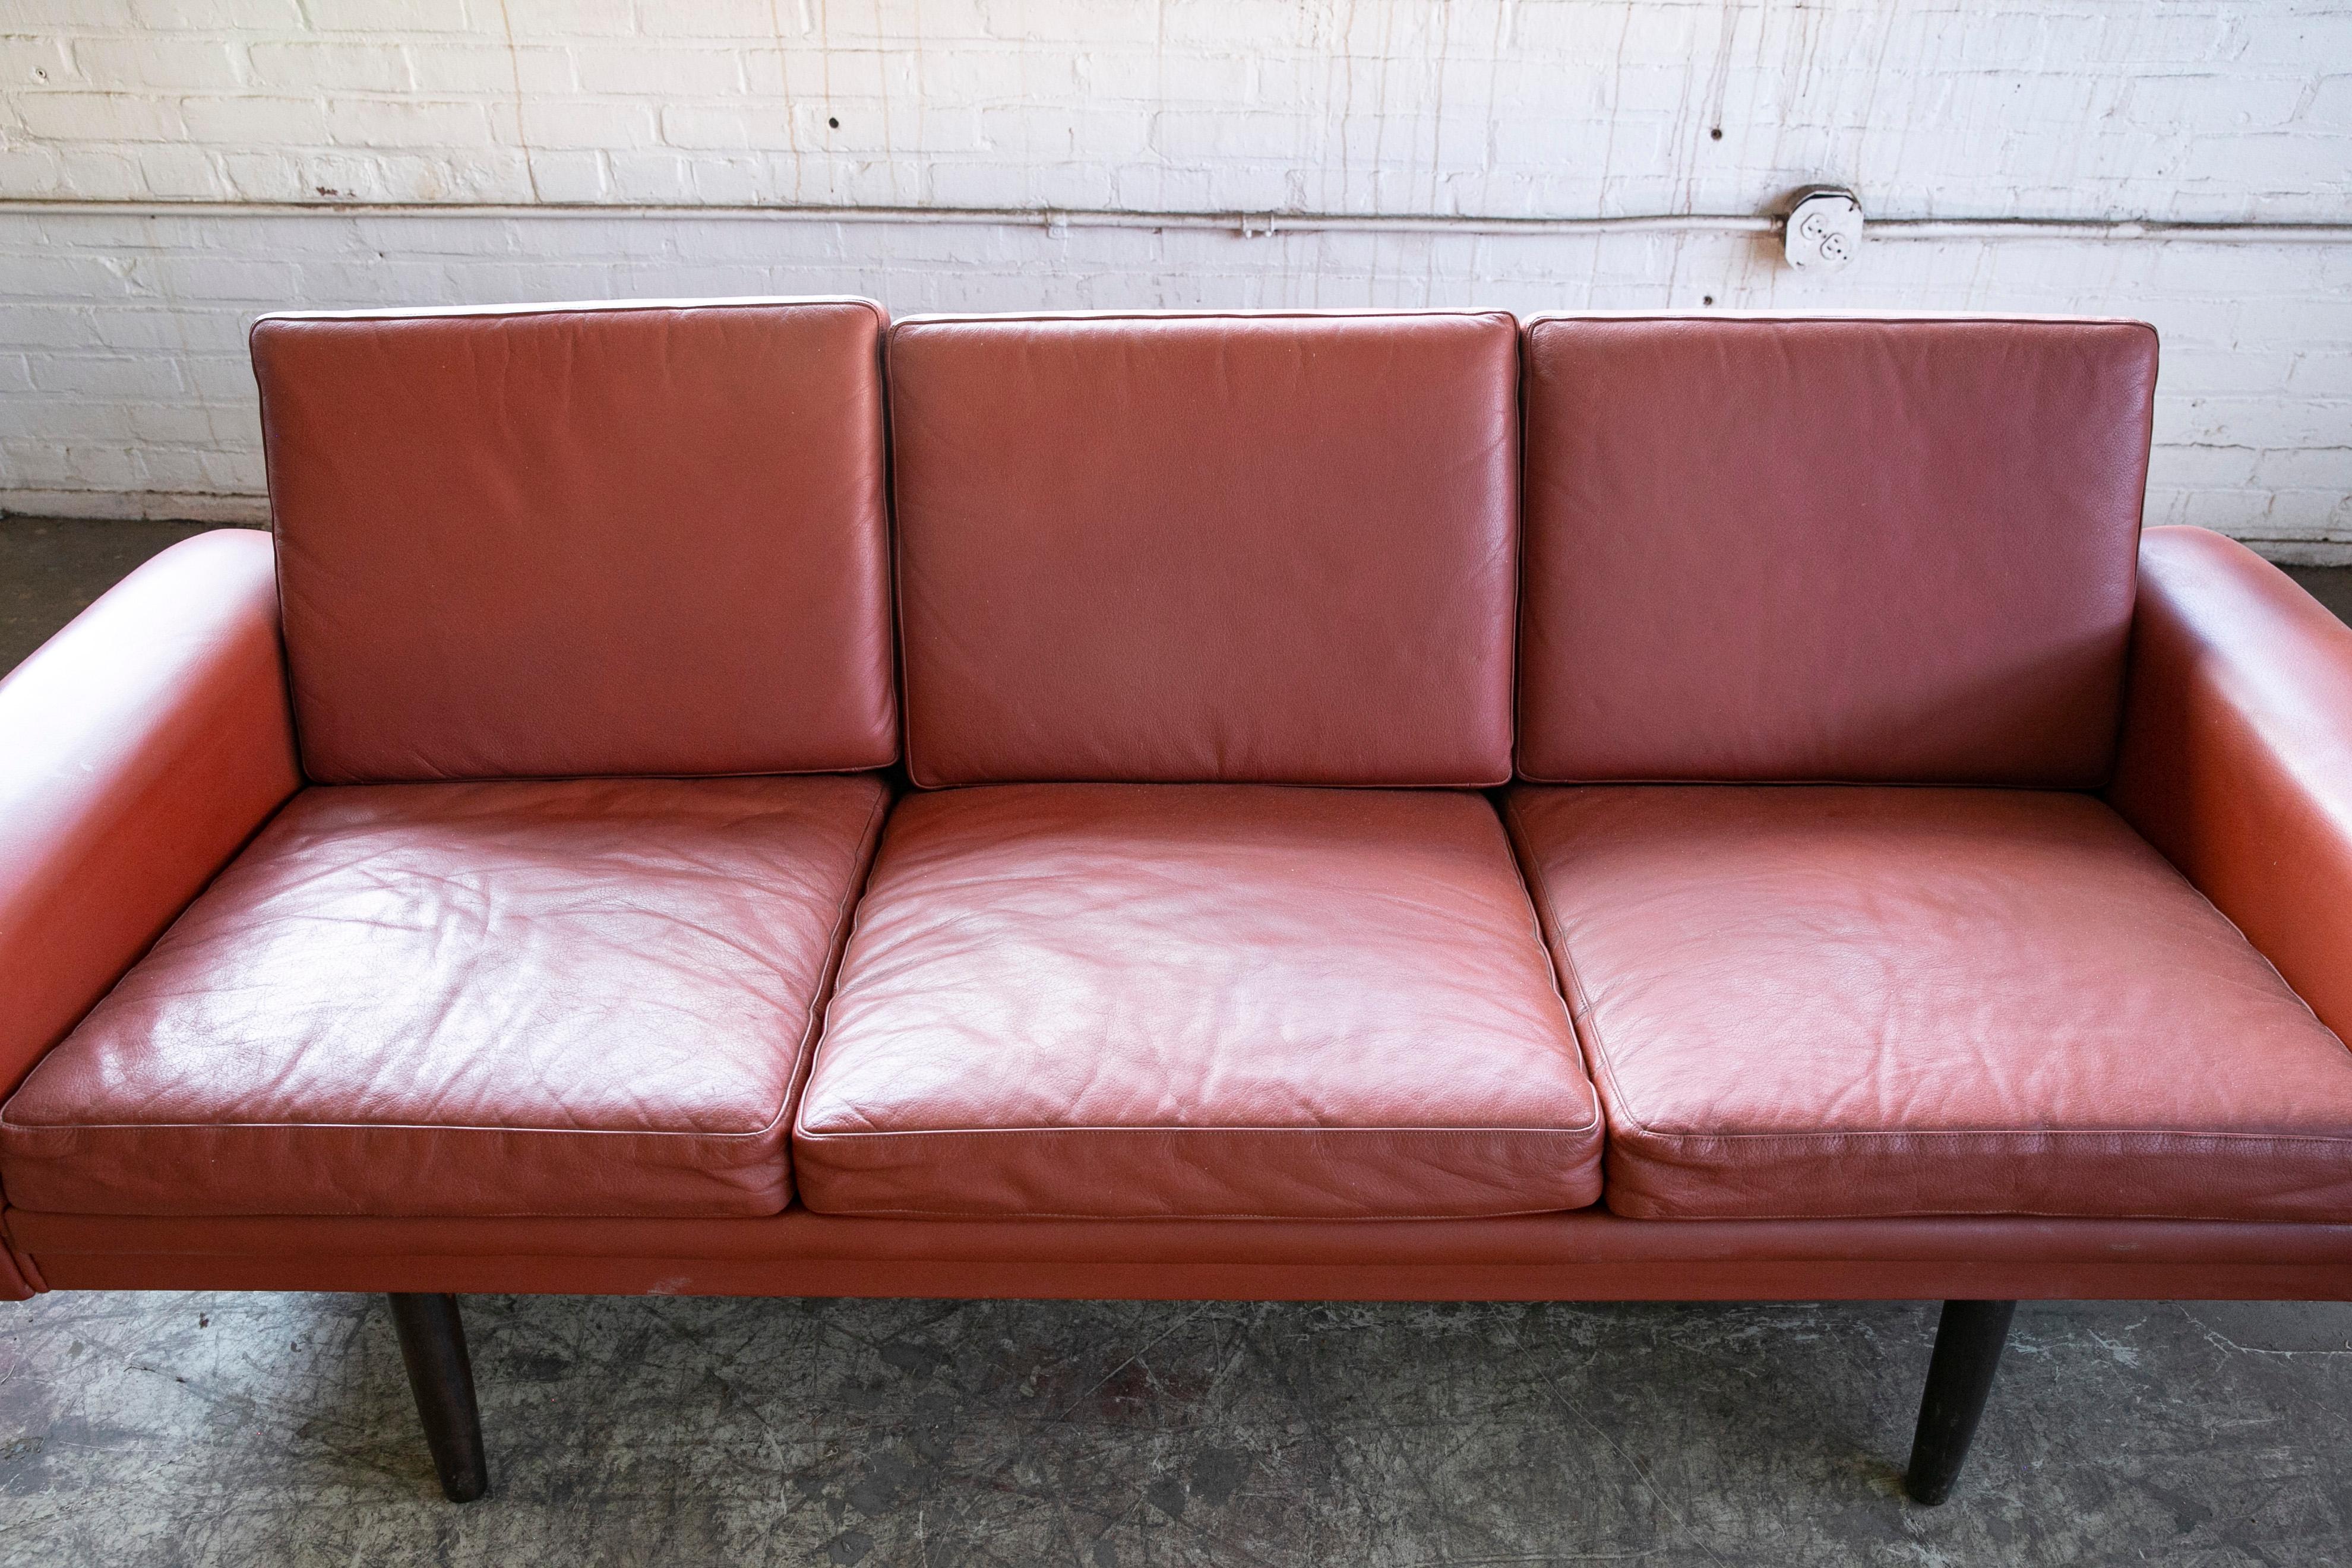 Mid-20th Century Classic Danish Mid-Century Sofa in Rust Red Colored Leather by Georg Thams